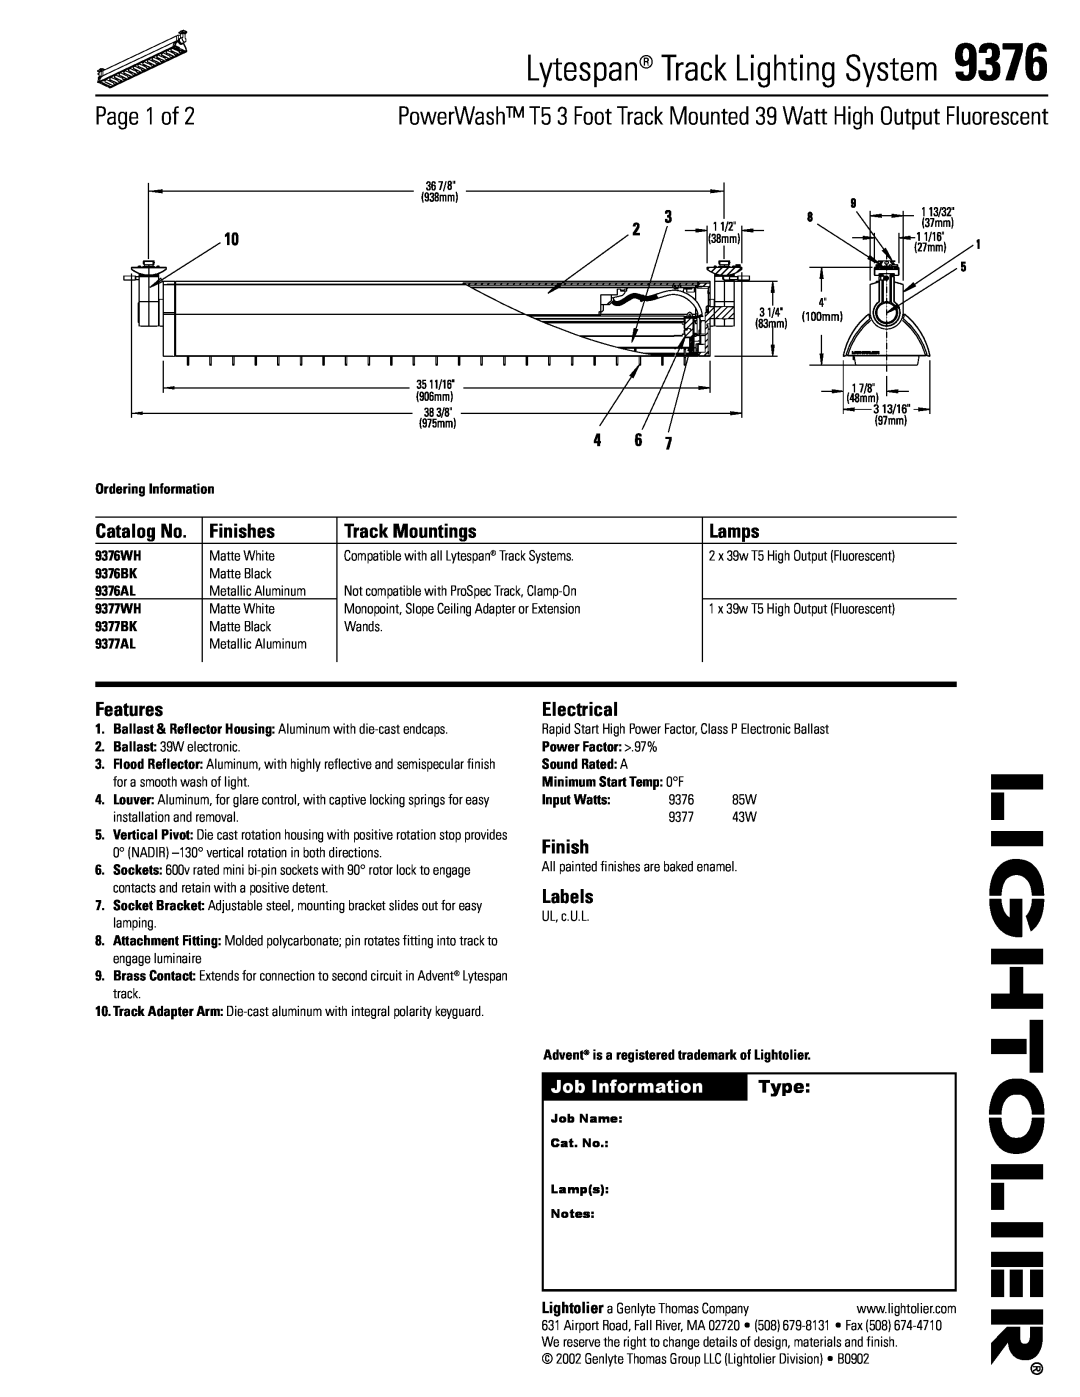 Lightolier 9376 manual Page 1 of, Finishes, Track Mountings, Lamps, Features, Electrical, Labels, Job Information, Type 